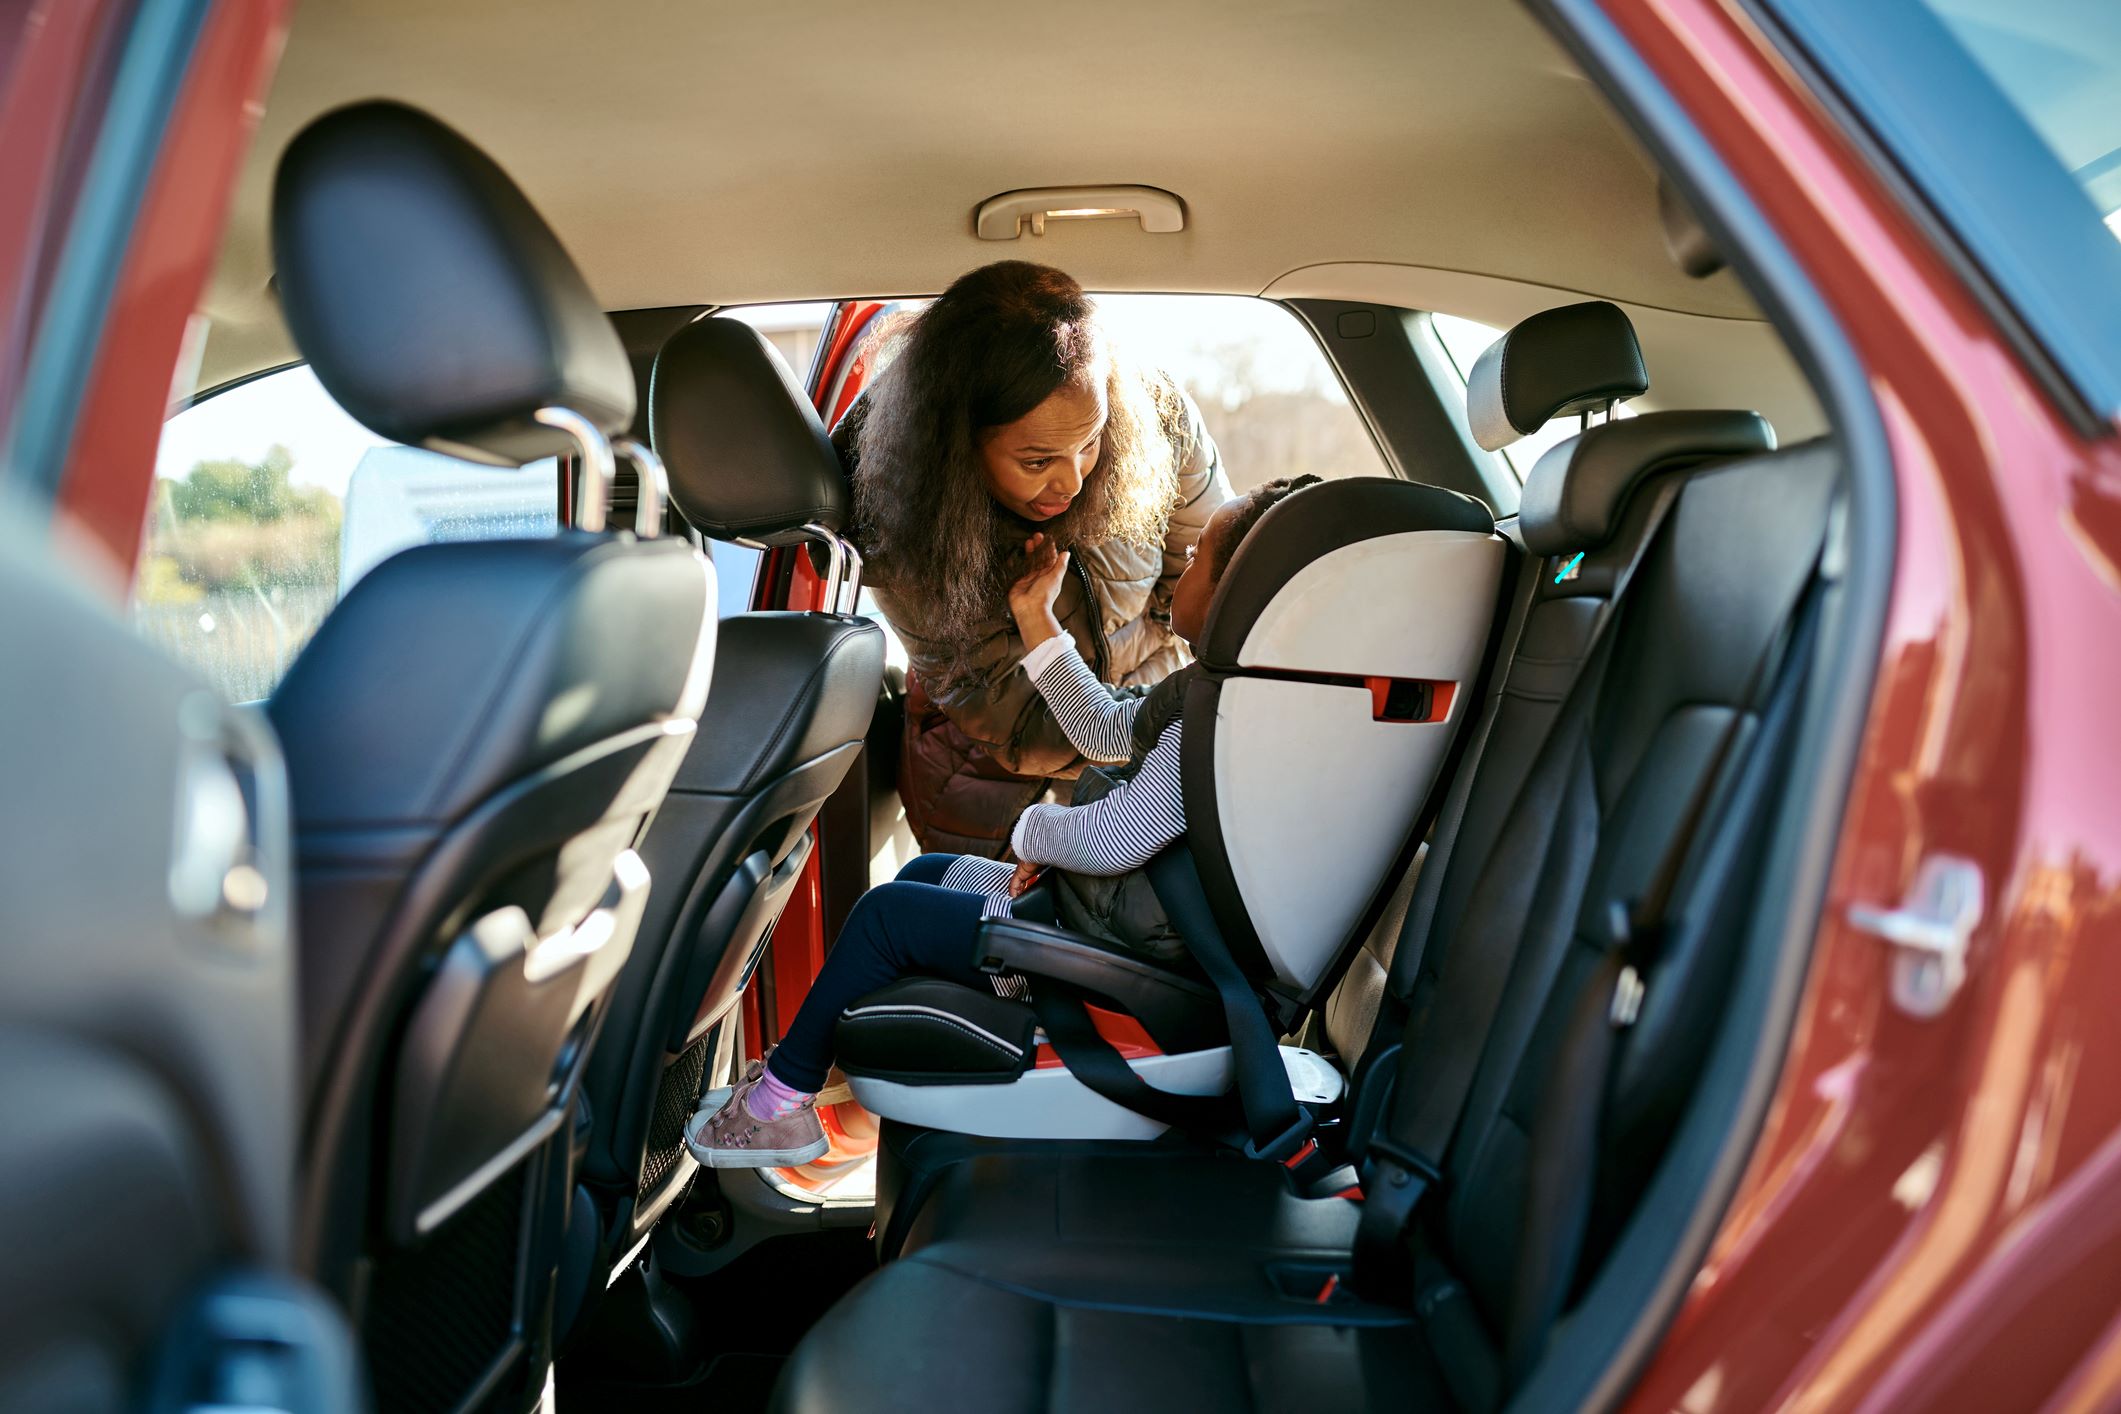 Unlock The Secret To Securing An Infant Seat With Uber Or Lyft!